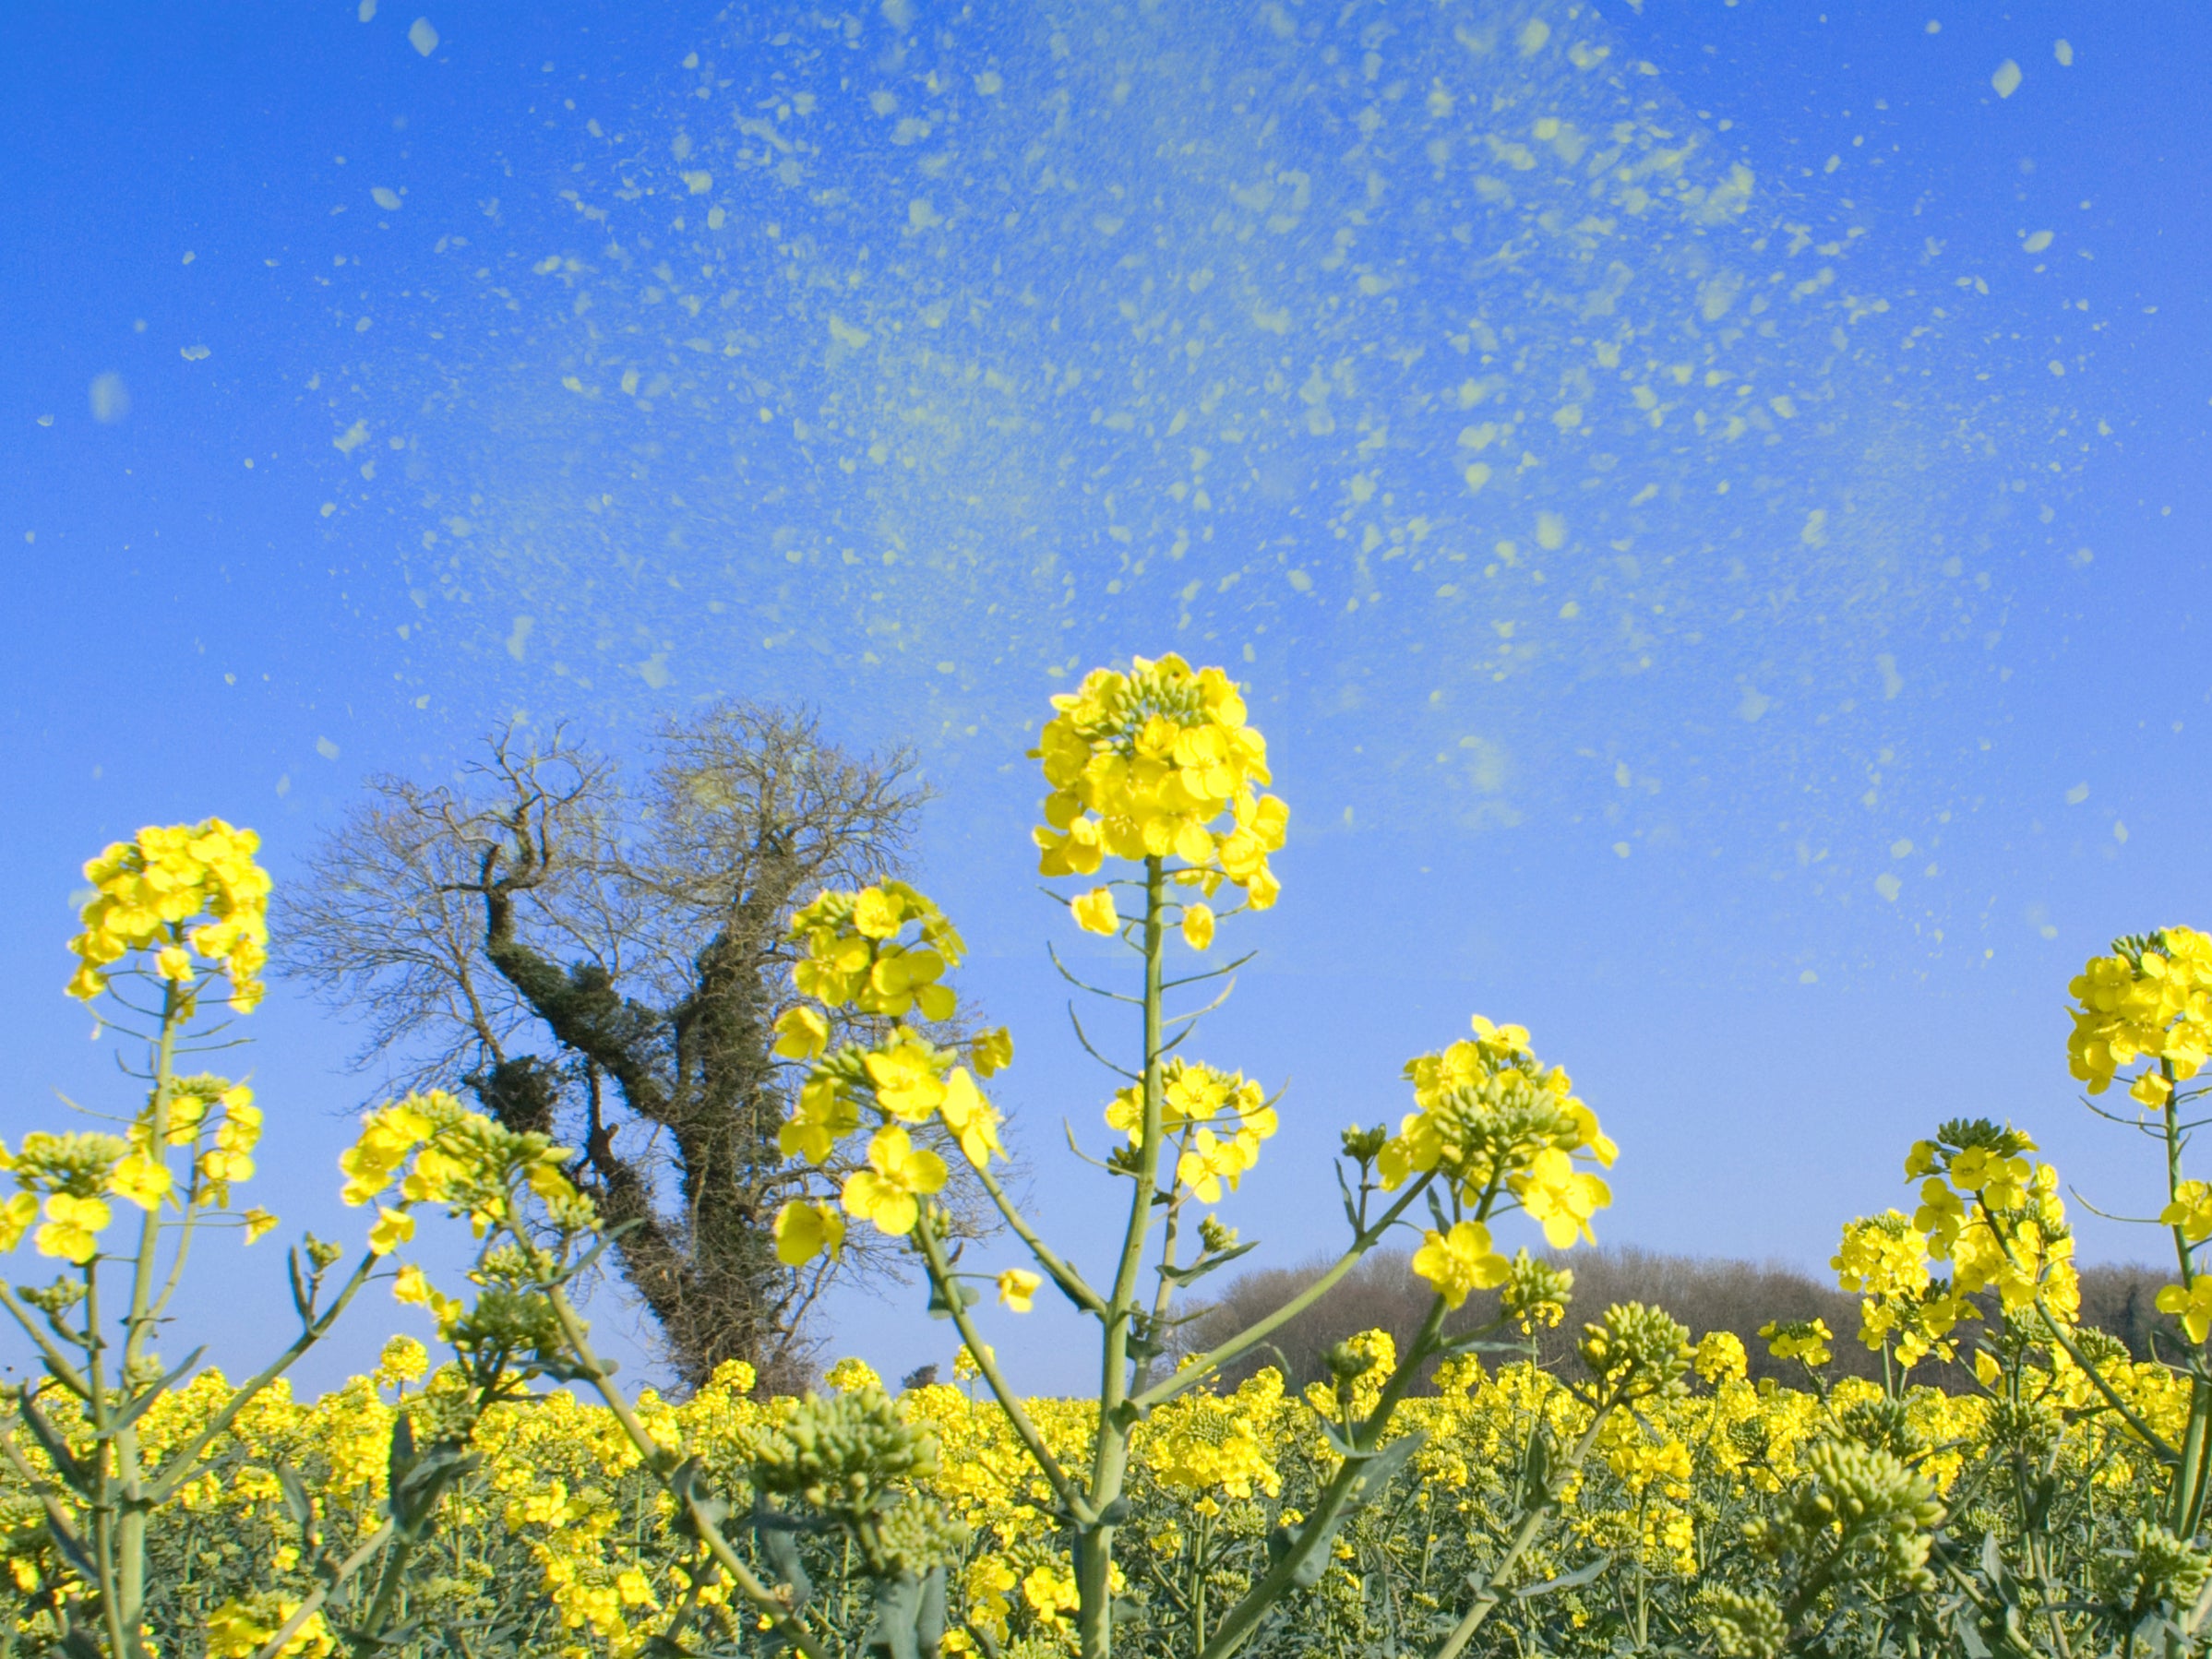 Image depicts release of pollen into the air, a common problem for hay fever sufferers